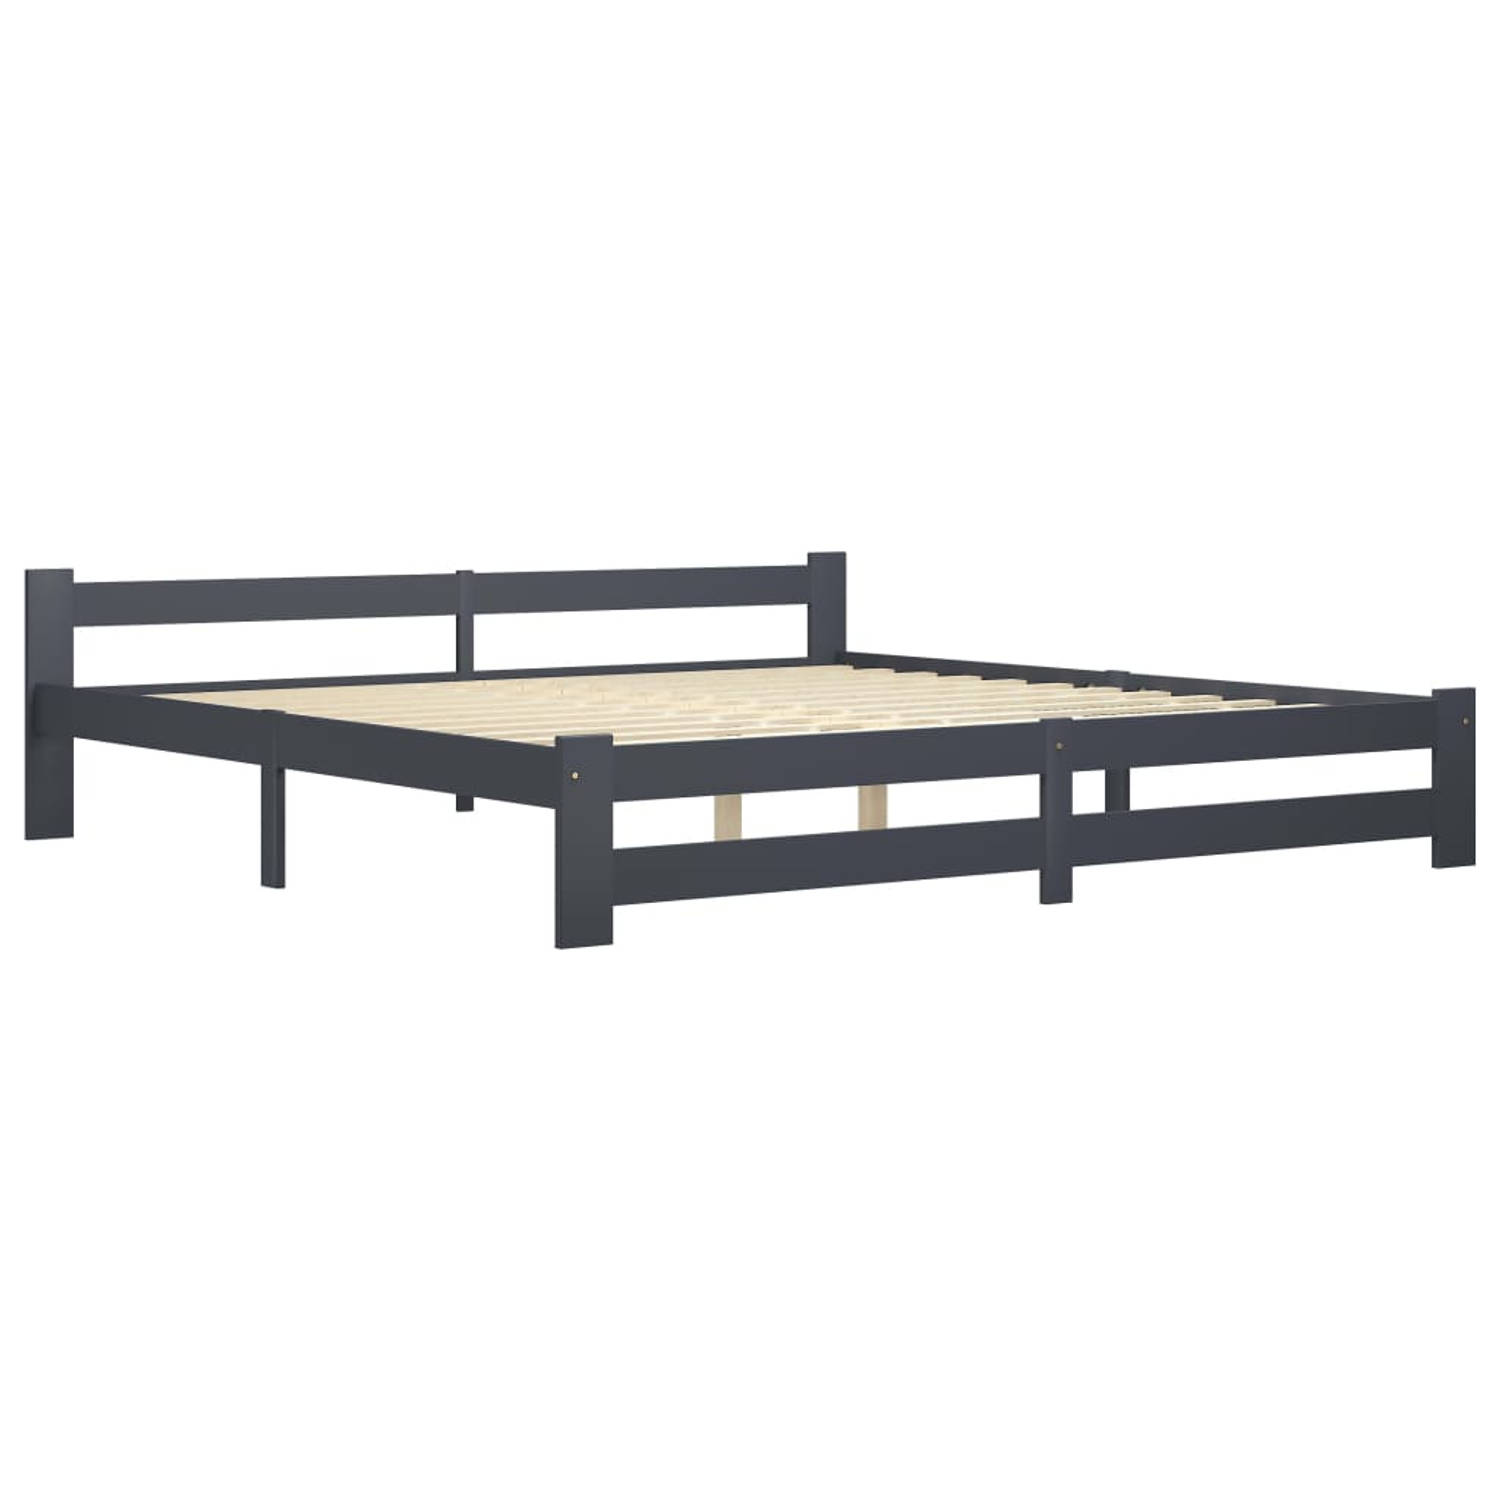 The Living Store Bedframe massief grenenhout donkergrijs 200x200 cm - Bedframe - Bedframes - Bed Frame - Bed Frames - Bed - Bedden - Houten Bedframe - Houten Bedframes - 2-persoons